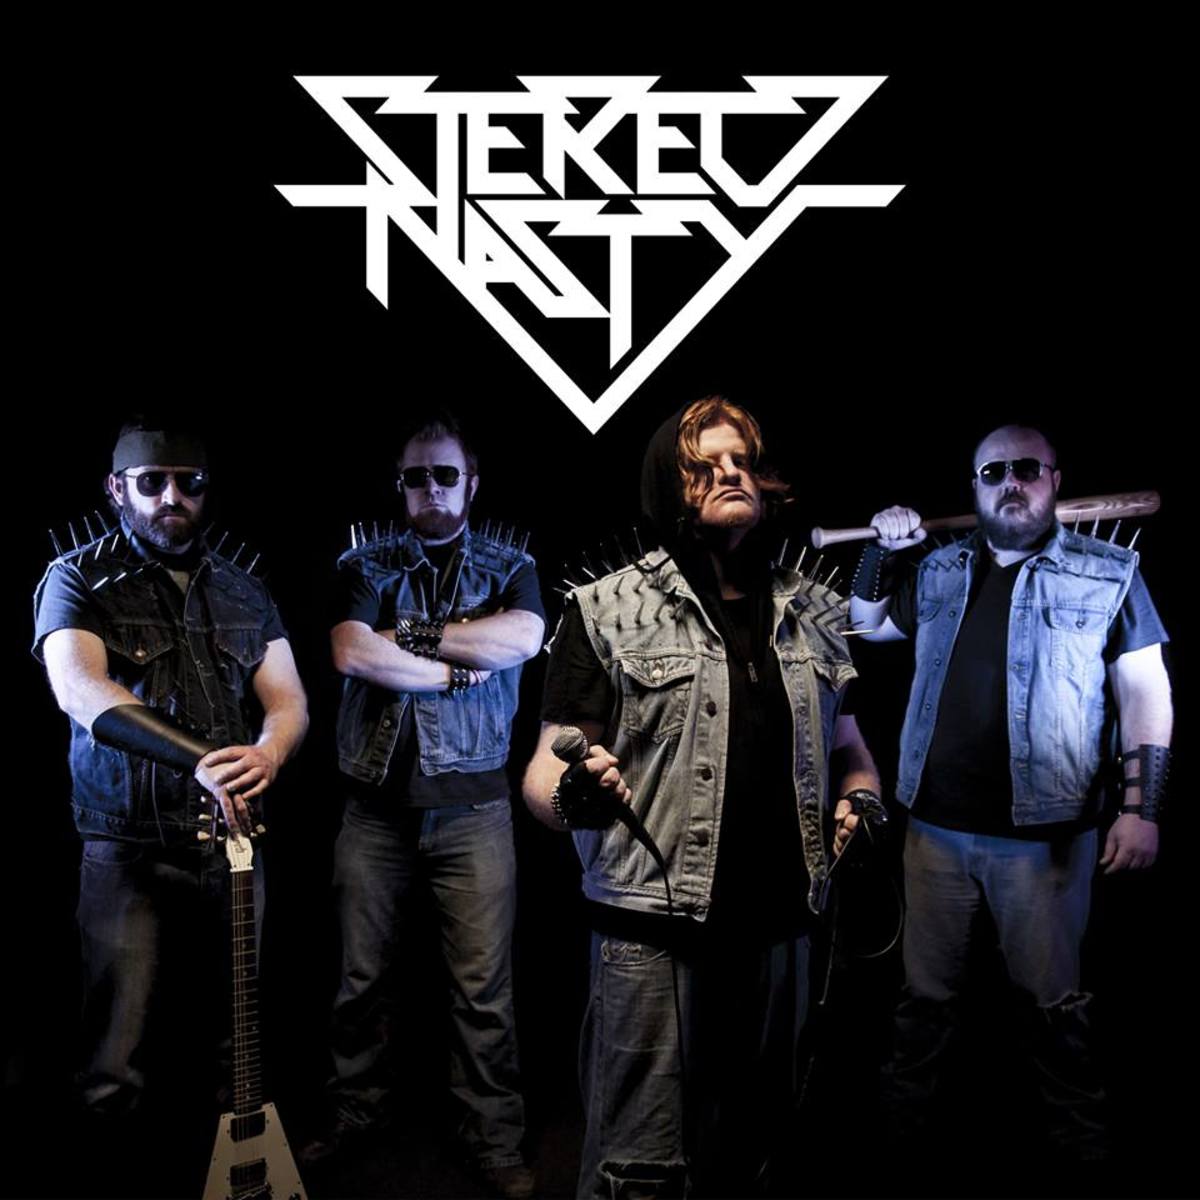 stereo-nasty-twisting-the-blade-2017-album-review